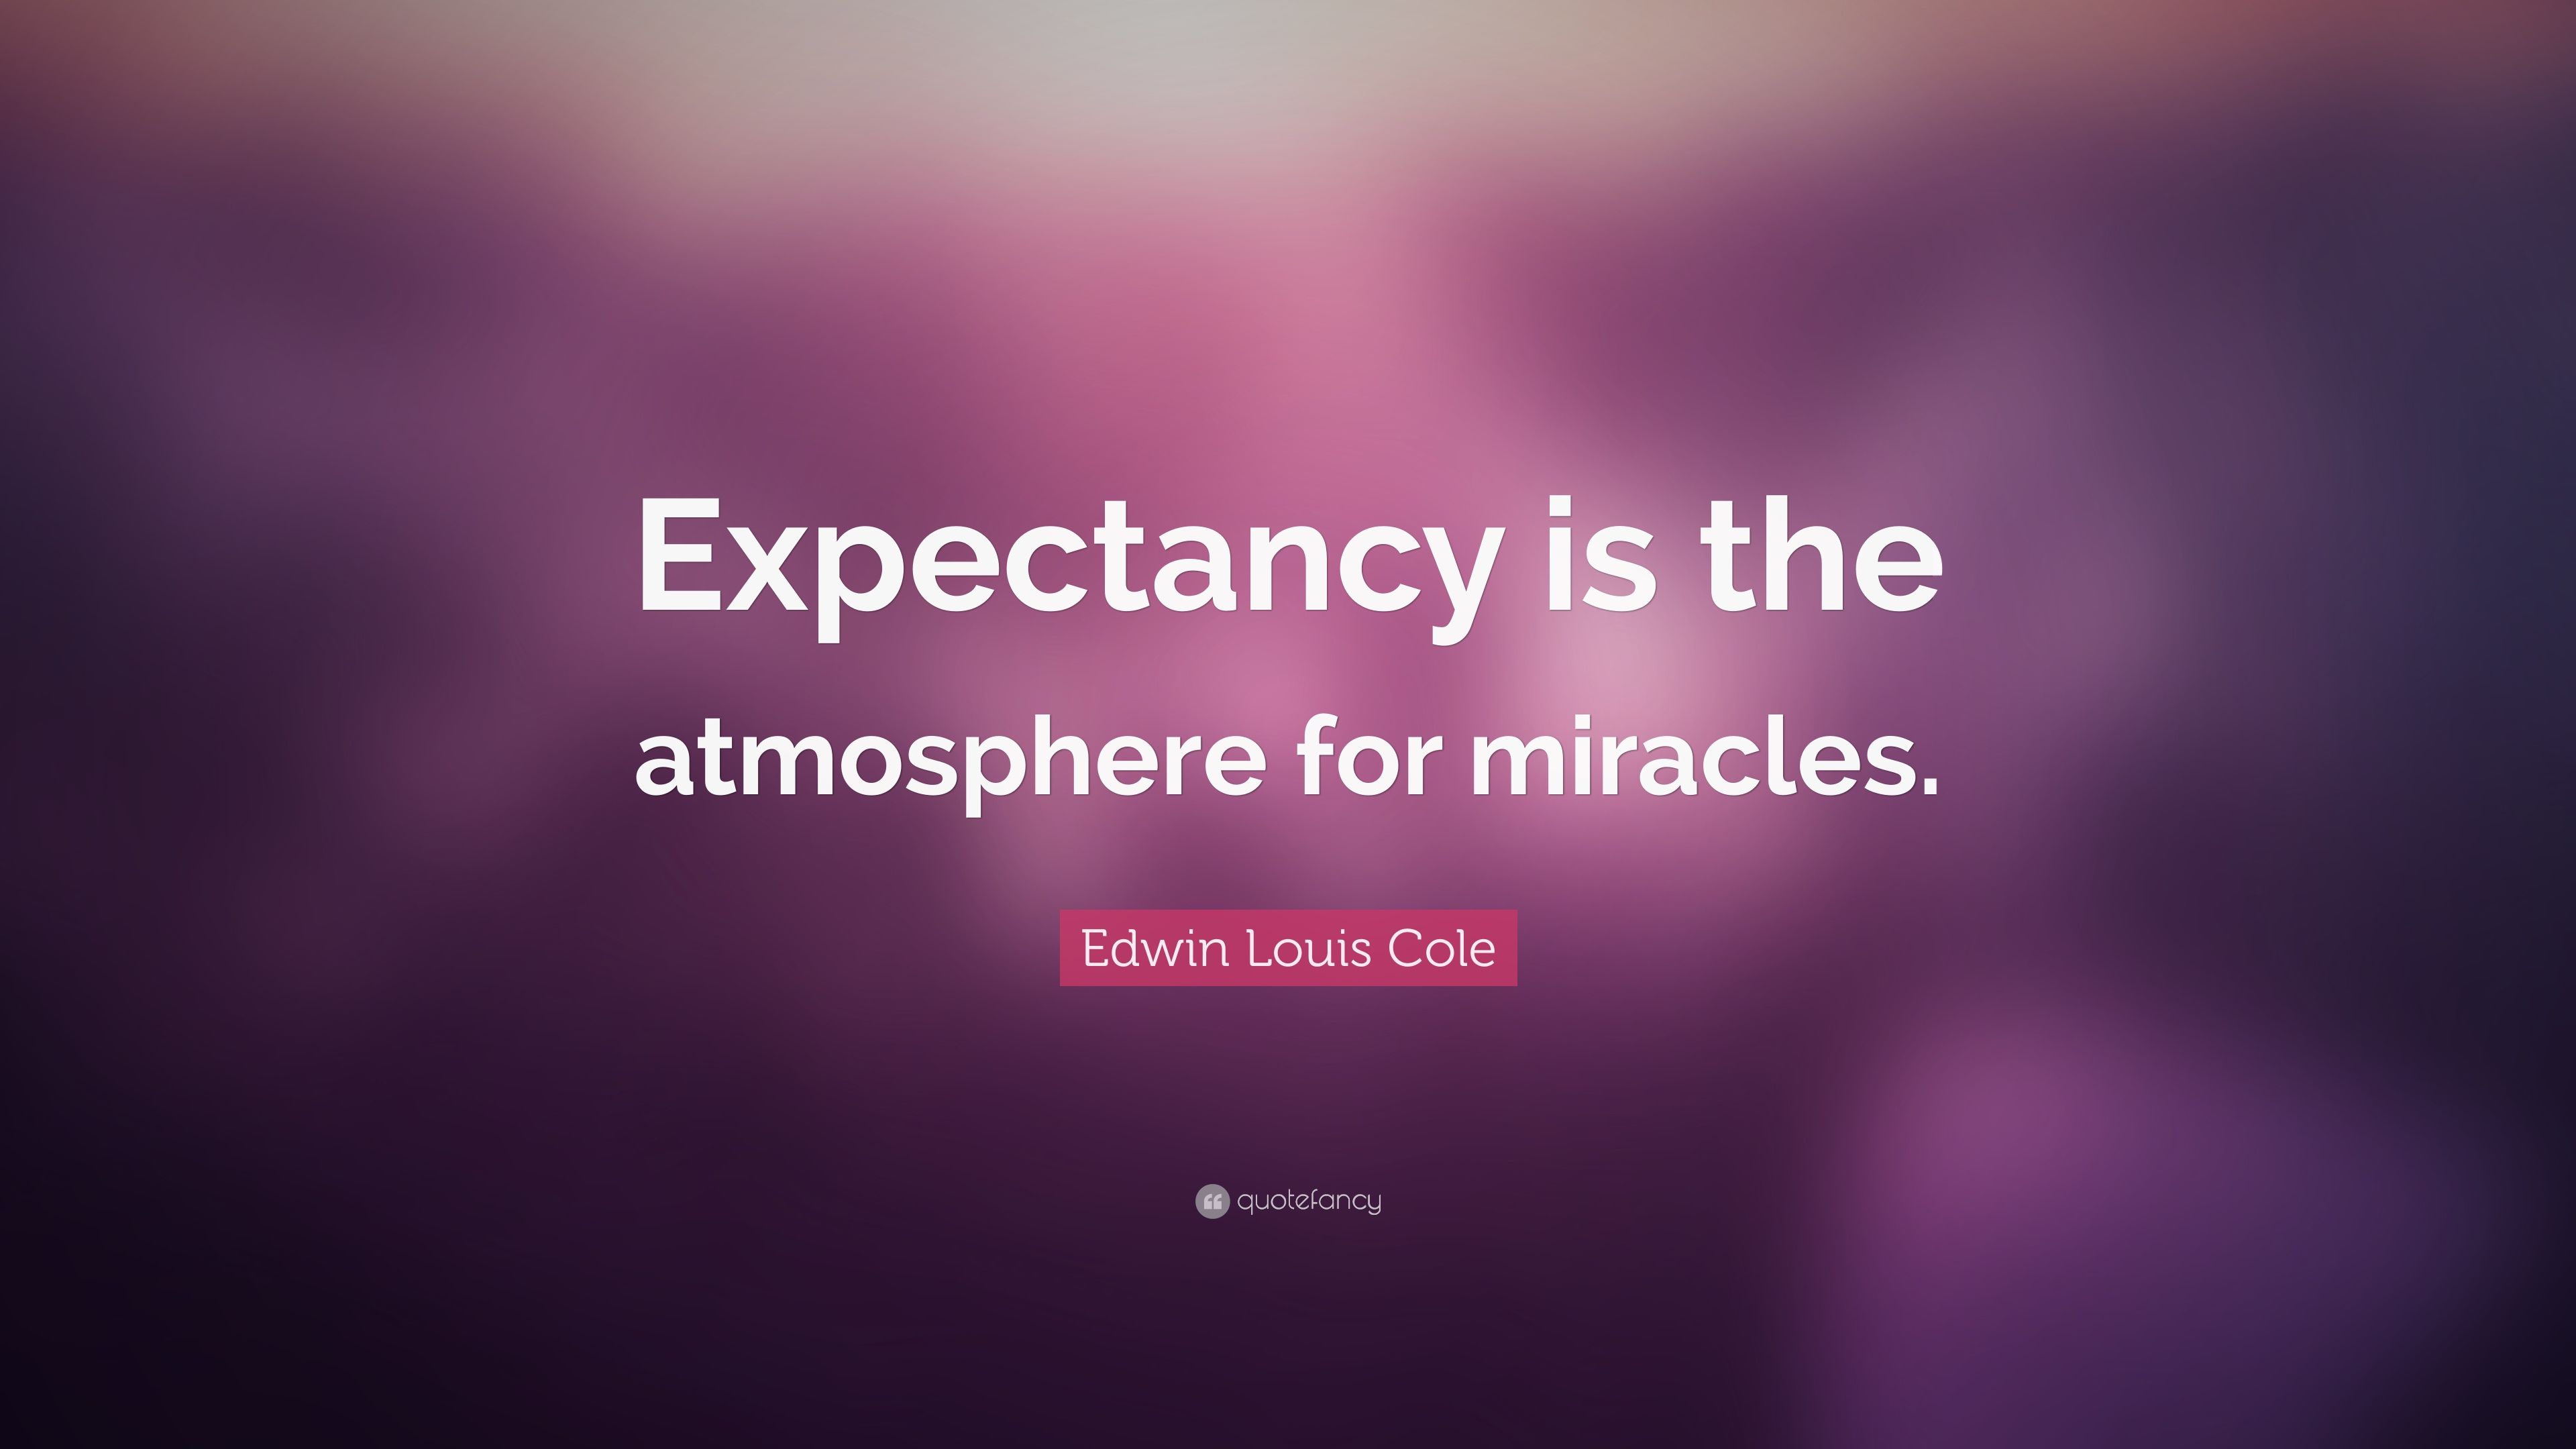 Edwin Louis Cole Quote: “Expectancy is the atmosphere for miracles.” (19 wallpaper)